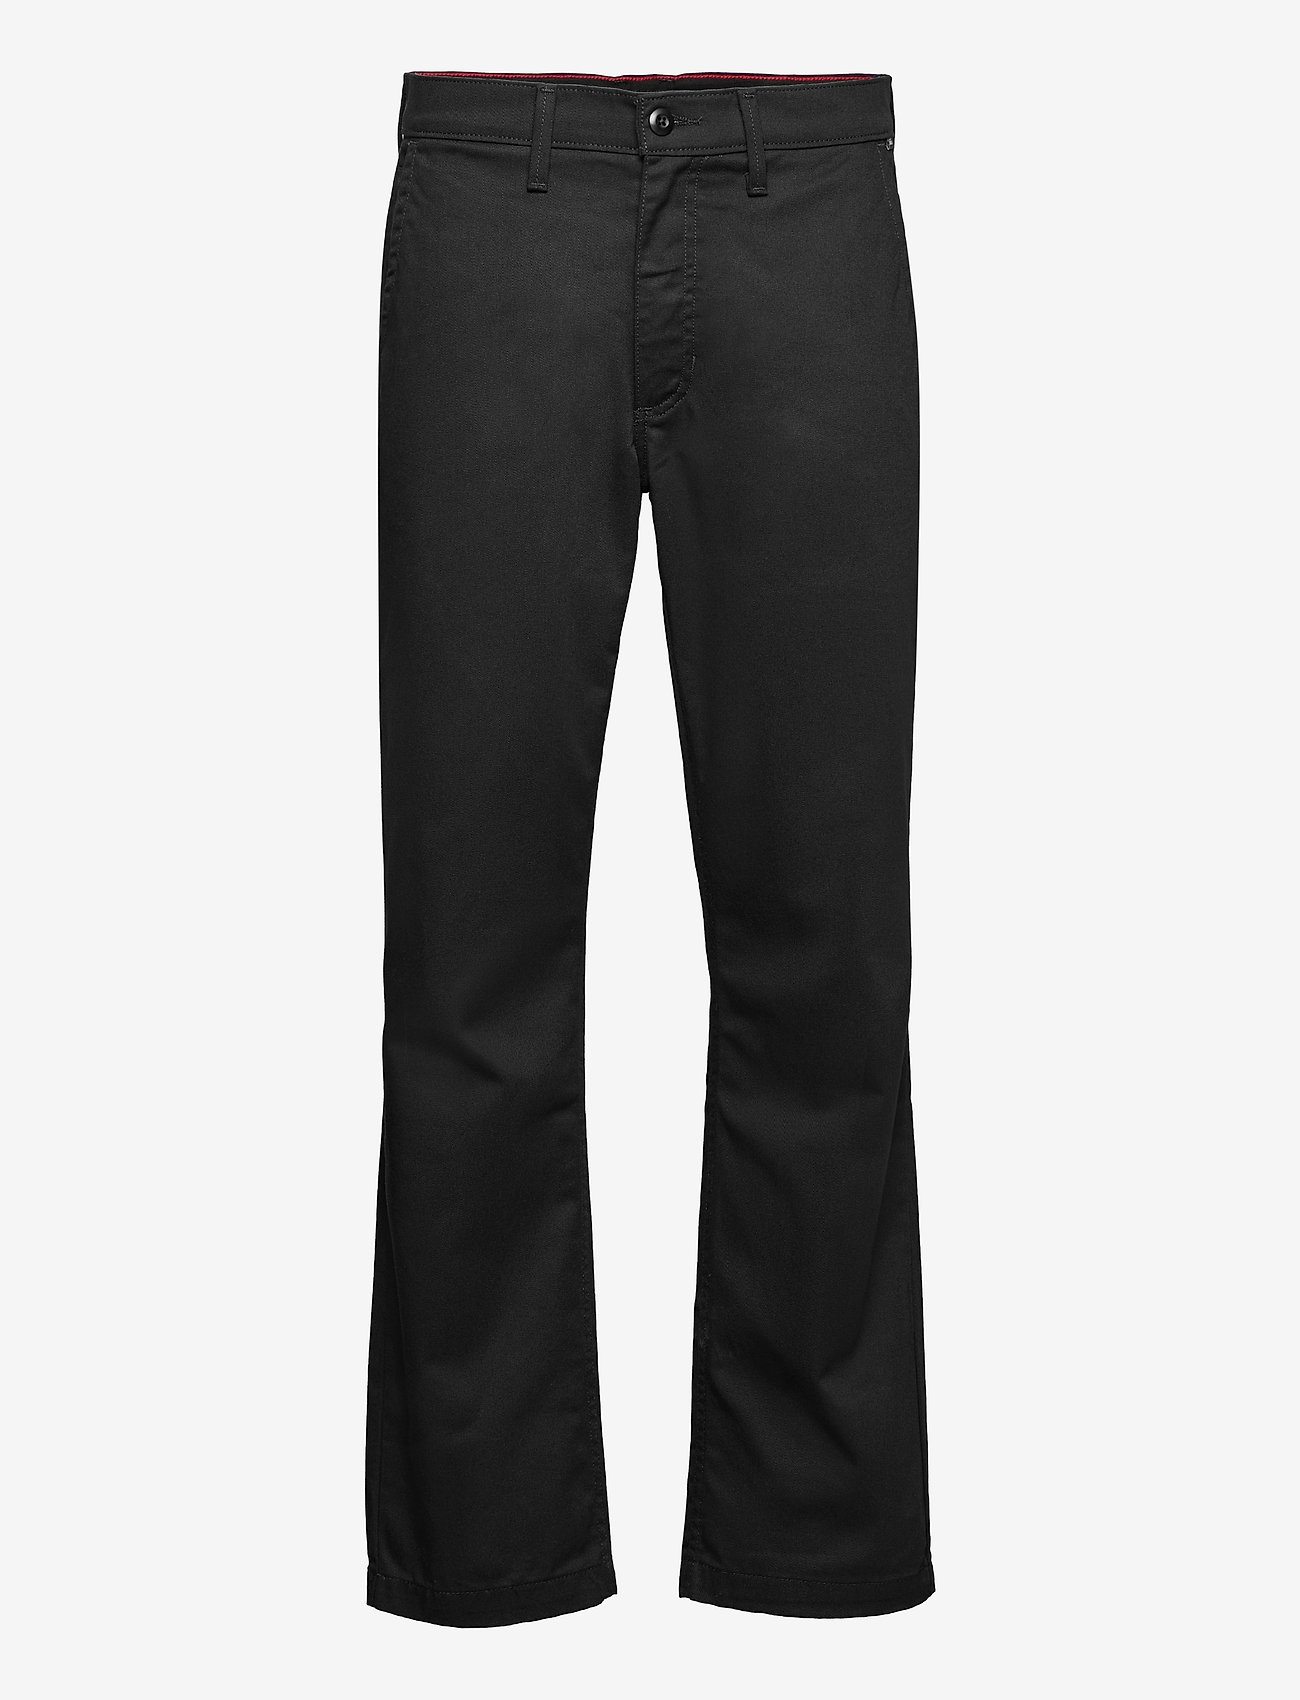 VANS - MN AUTHENTIC CHINO RELAXED PANT - sporta bikses - black - 0